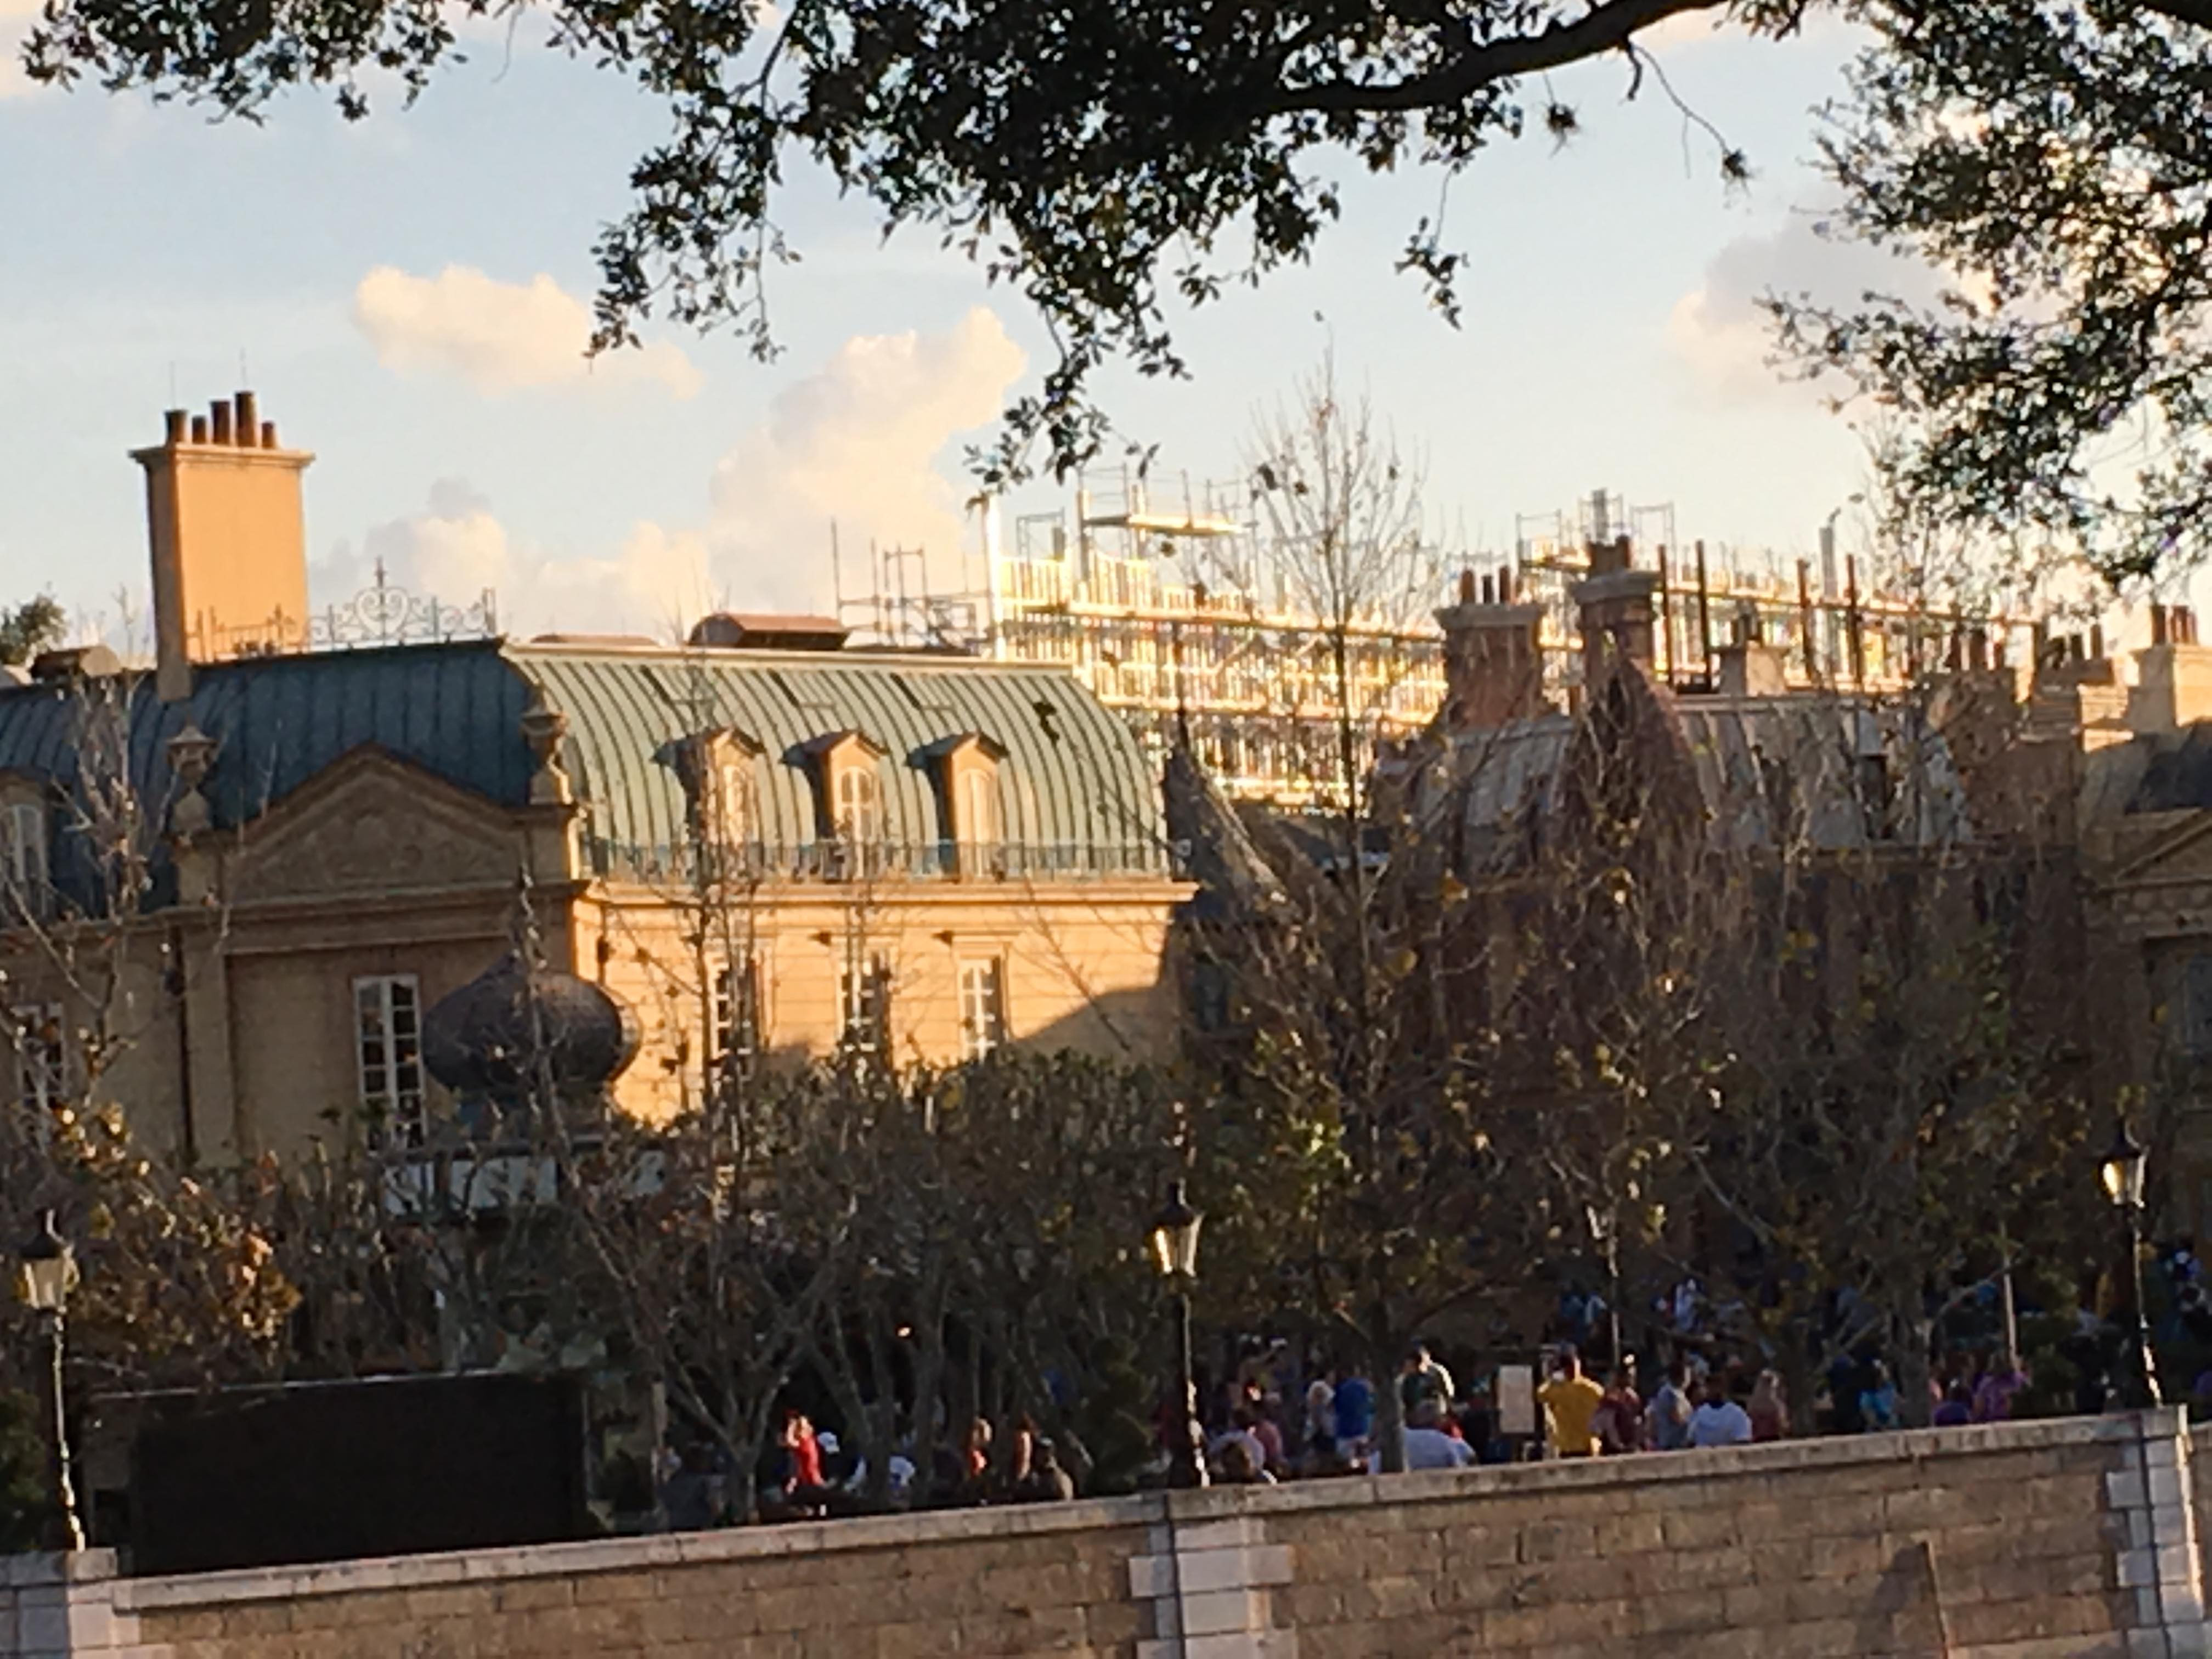 Construction at the France Pavilion Continues to Progress